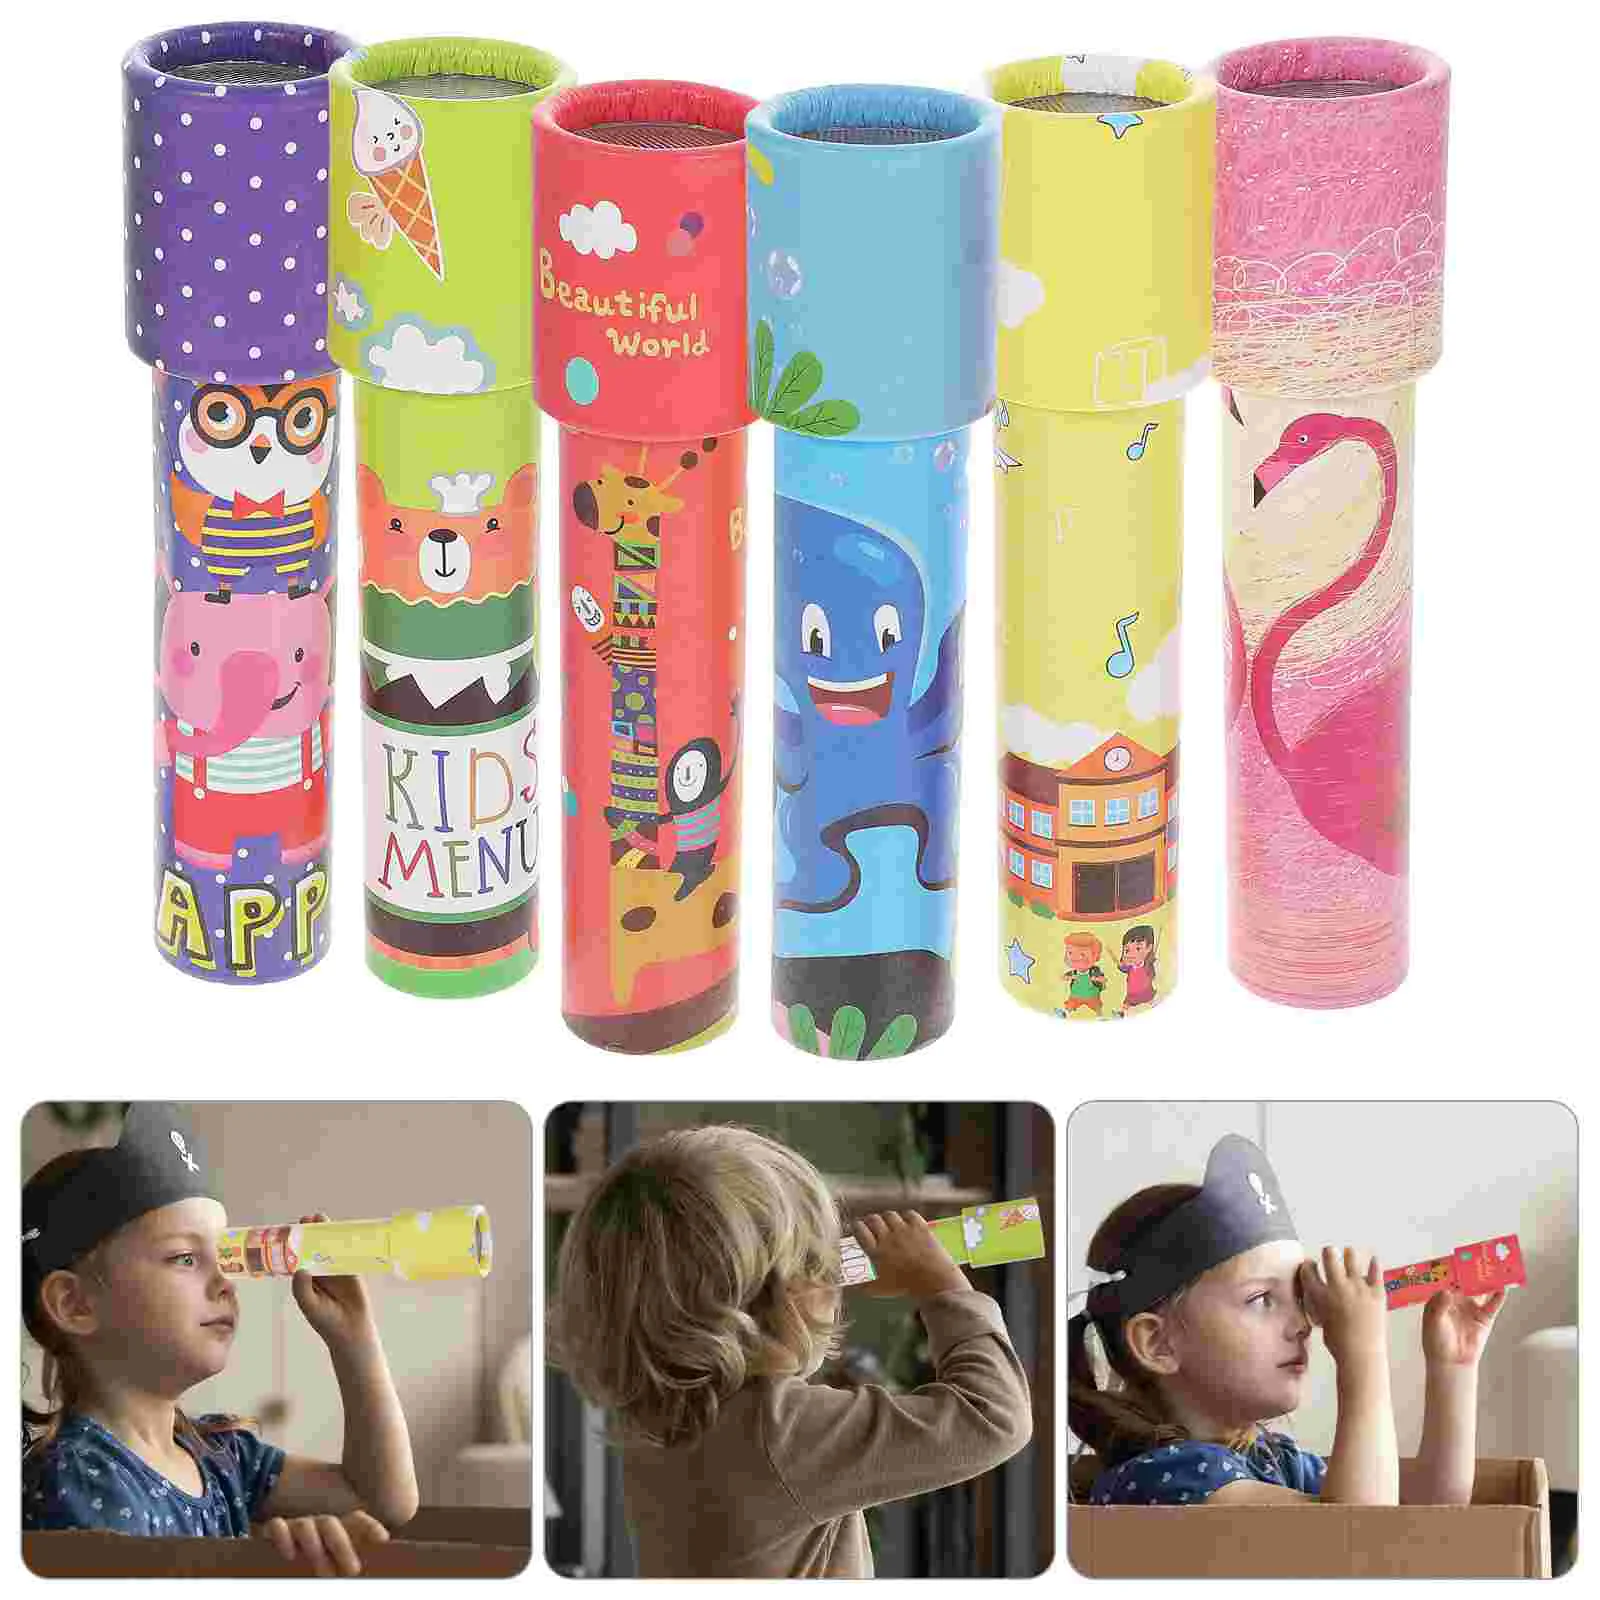 

Kaleidoscope Kidstoy Party Toys Favors Kaleidoscopes Birthday Paper Gifts Plaything Stuffers Classic Return Childreneducational